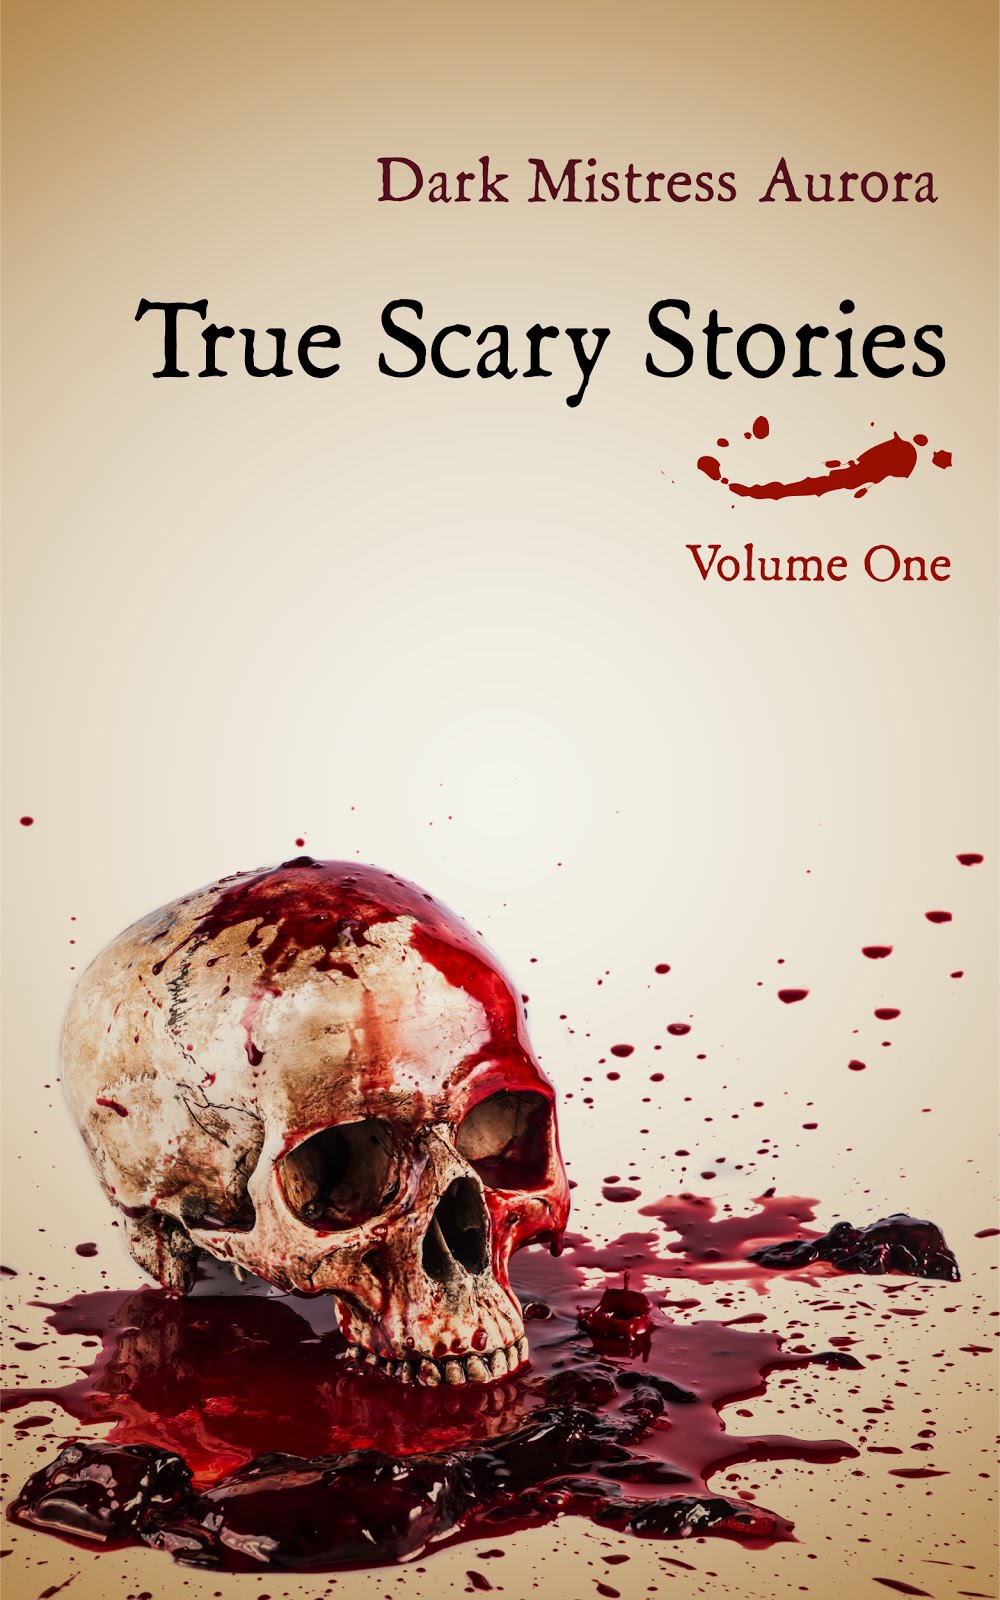 Do You Like Free Horror Stories?